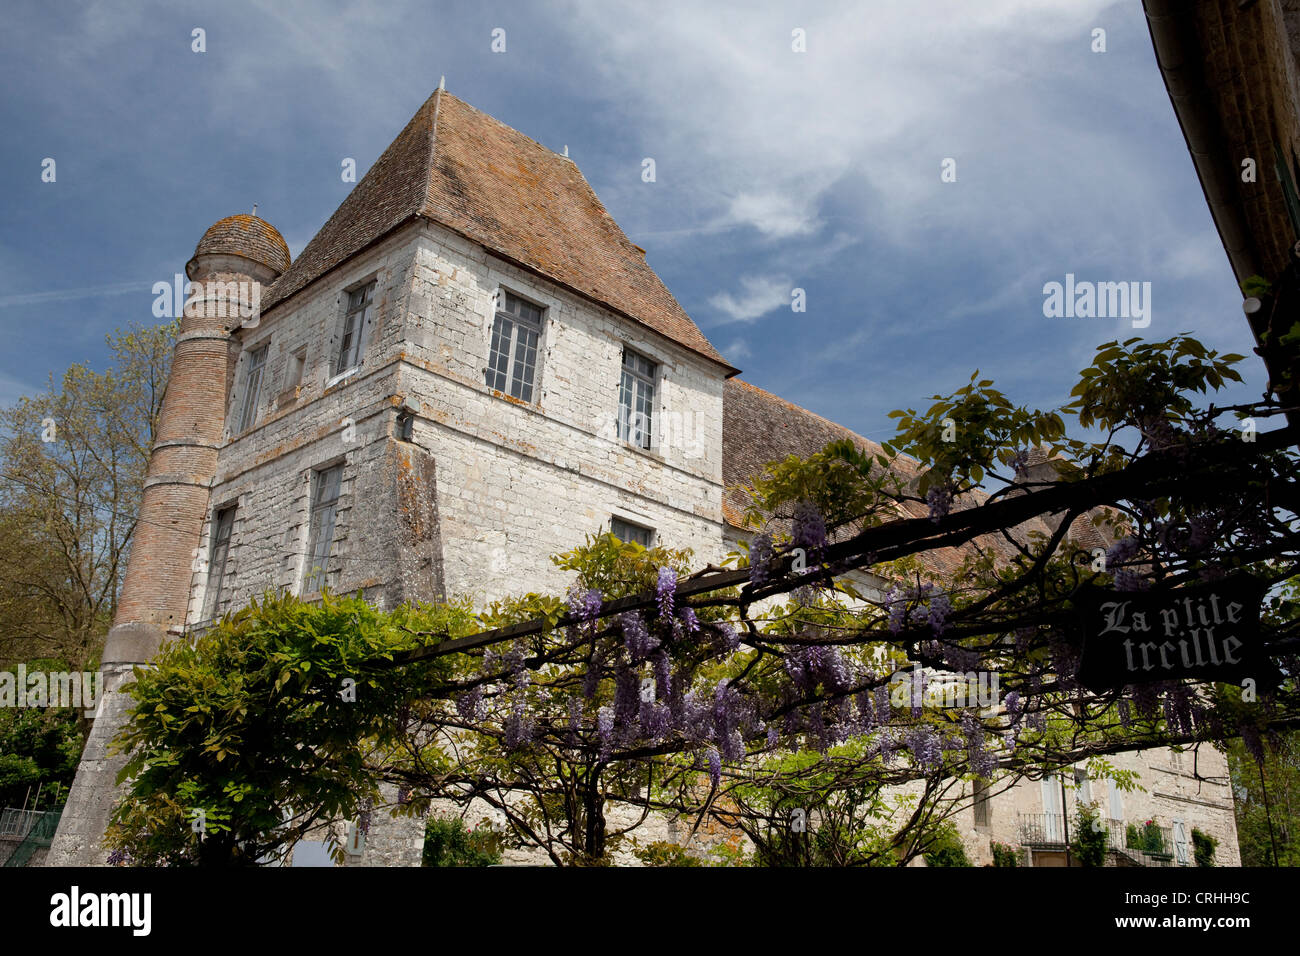 Wisteria outside a cafe in medieval Issigeac Perigord Southwest France Stock Photo